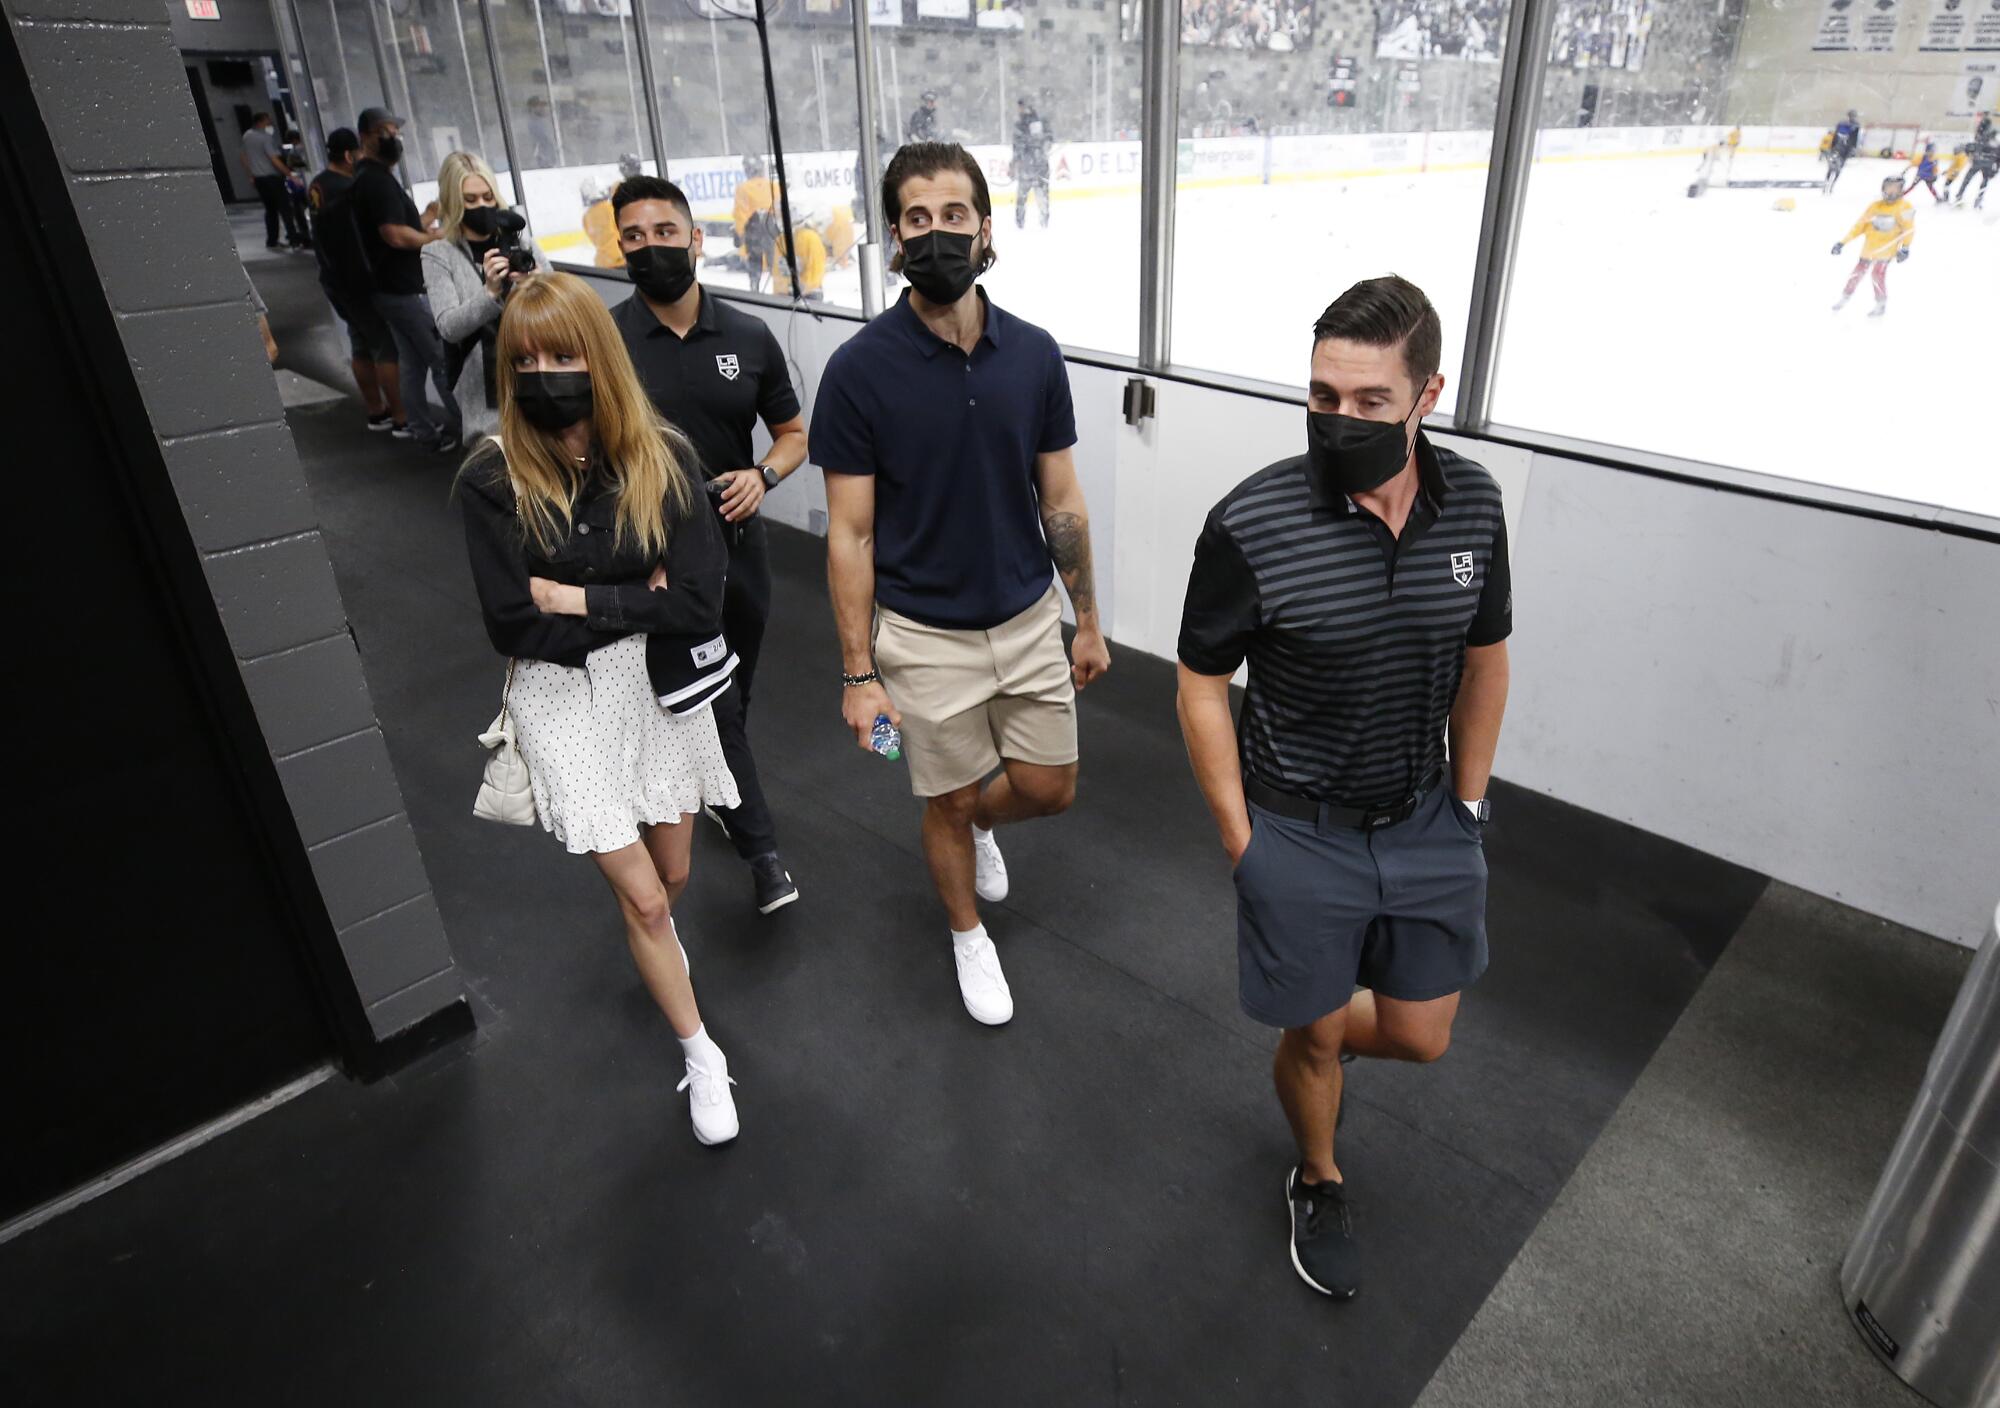 Jeff Andrews, assistant athletic trainer, leads Phillip and Marie Danault on their tour, walking past an ice rink